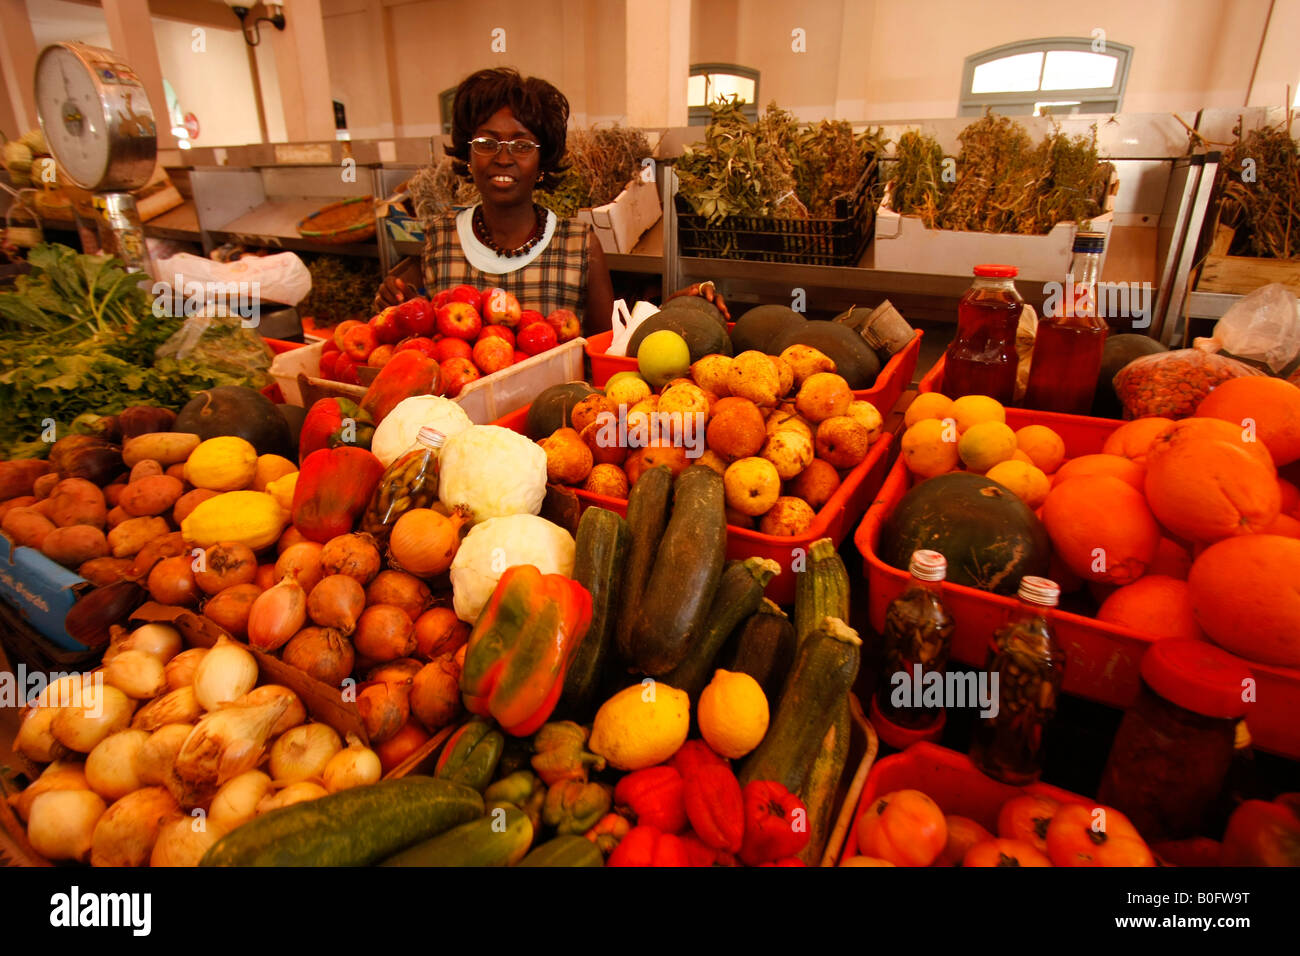 woman selling fruit and vegetables in the market hall in Mindelo Sao Vicente island Cape Verde Stock Photo